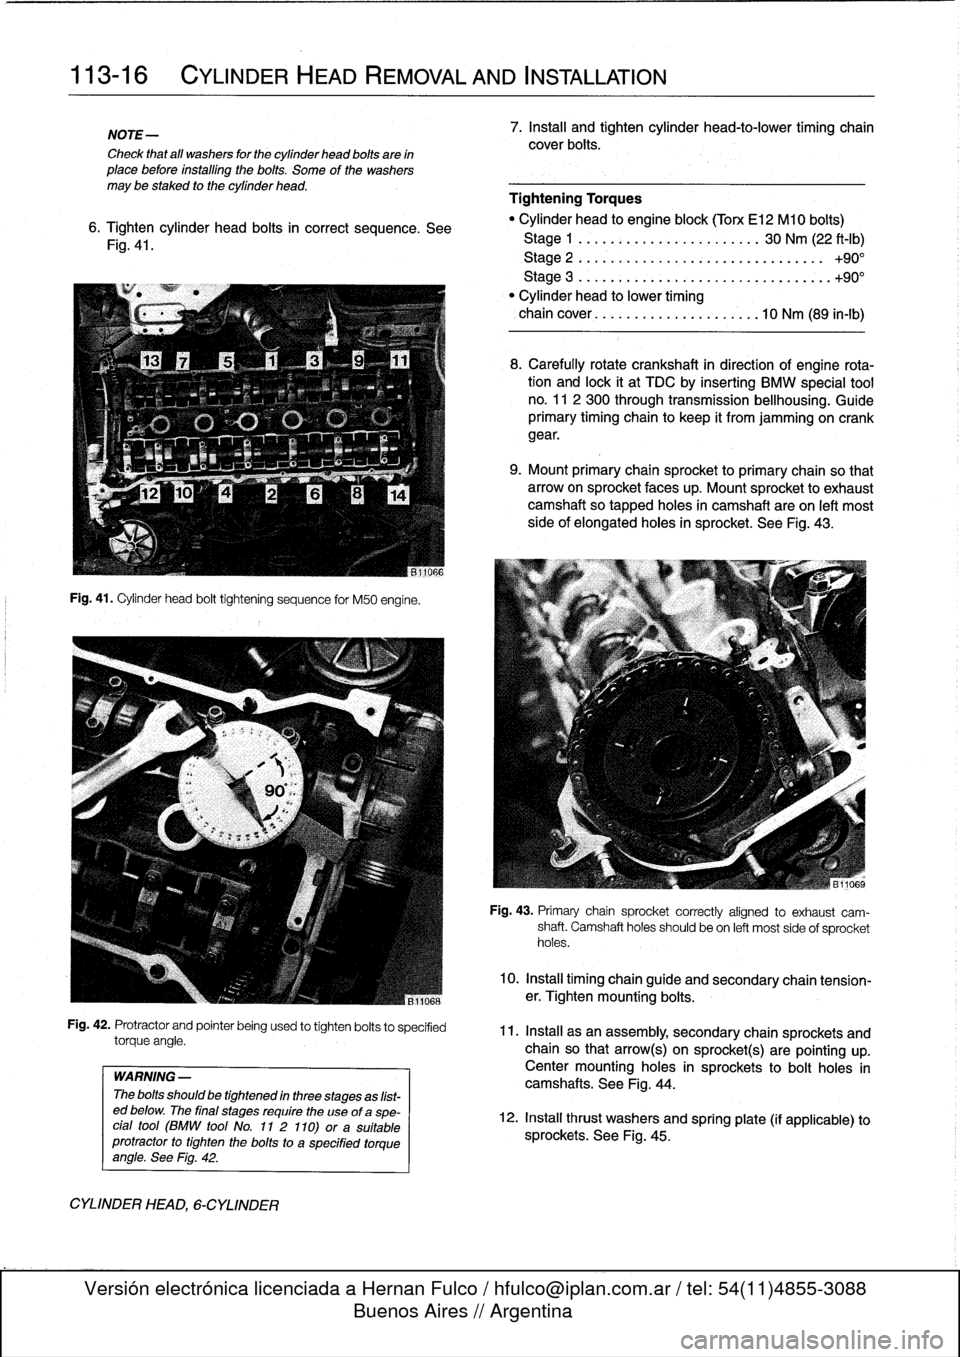 BMW M3 1993 E36 Owners Guide 
113-16

	

CYLINDER
HEAD
REMOVAL
AND
INSTALLATION

NOTE-

Check
that
all
washers
for
the
cylinder
head
bolts
are
in
place
before
installlng
the
bolts
.
Some
of
the
washers
may
be
staked
to
the
cylind